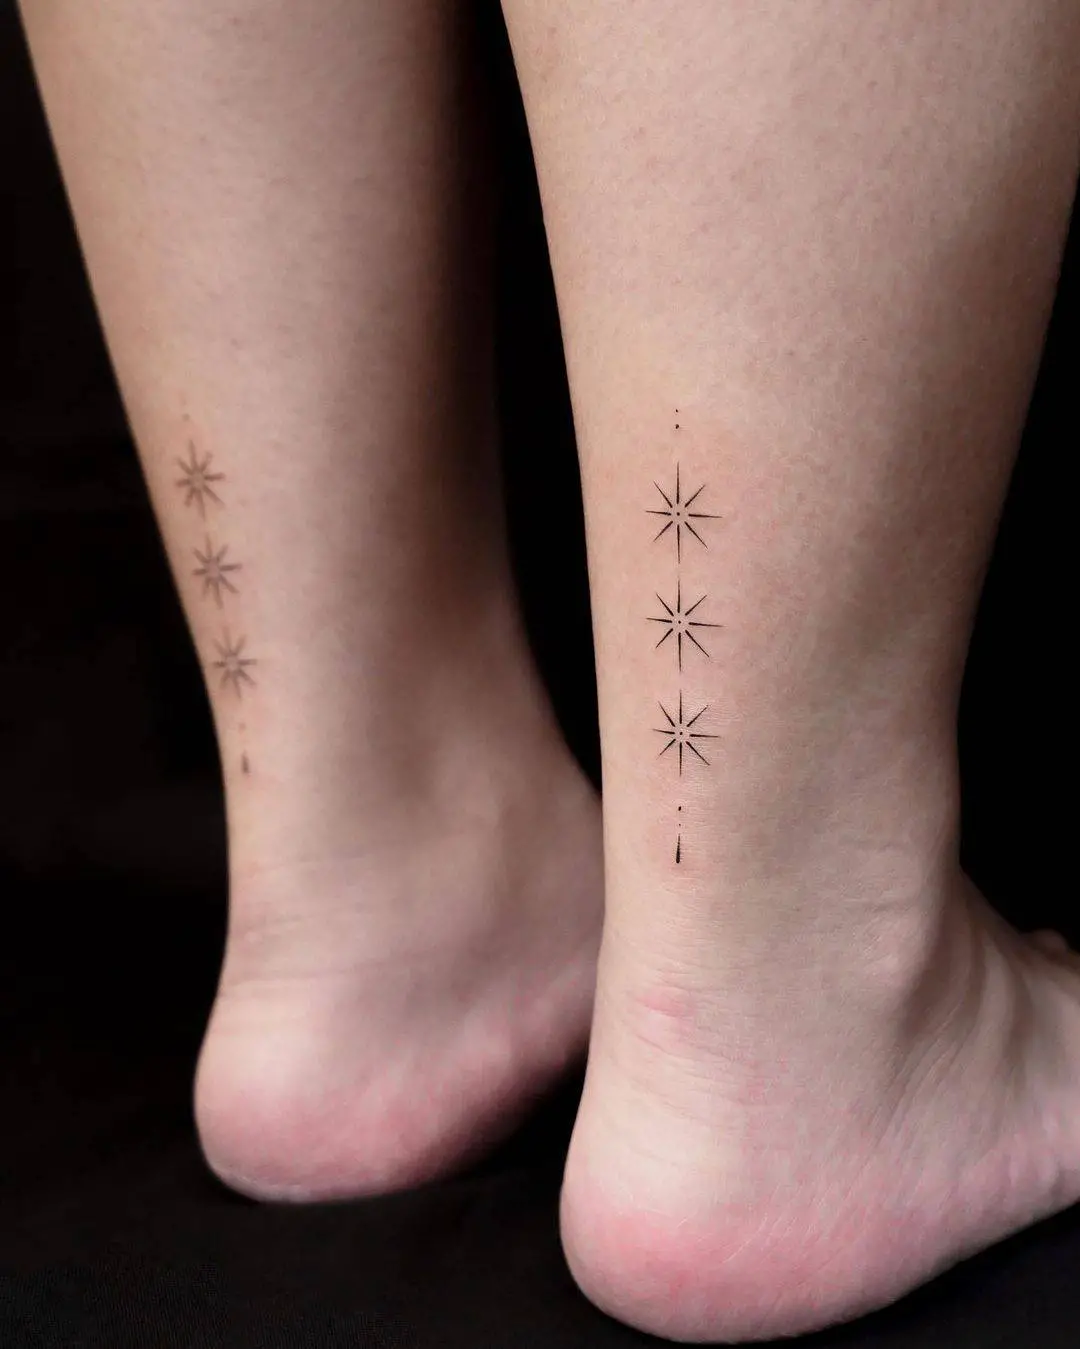 Star Tattoos for Men - Ideas and Inspirations for Guys